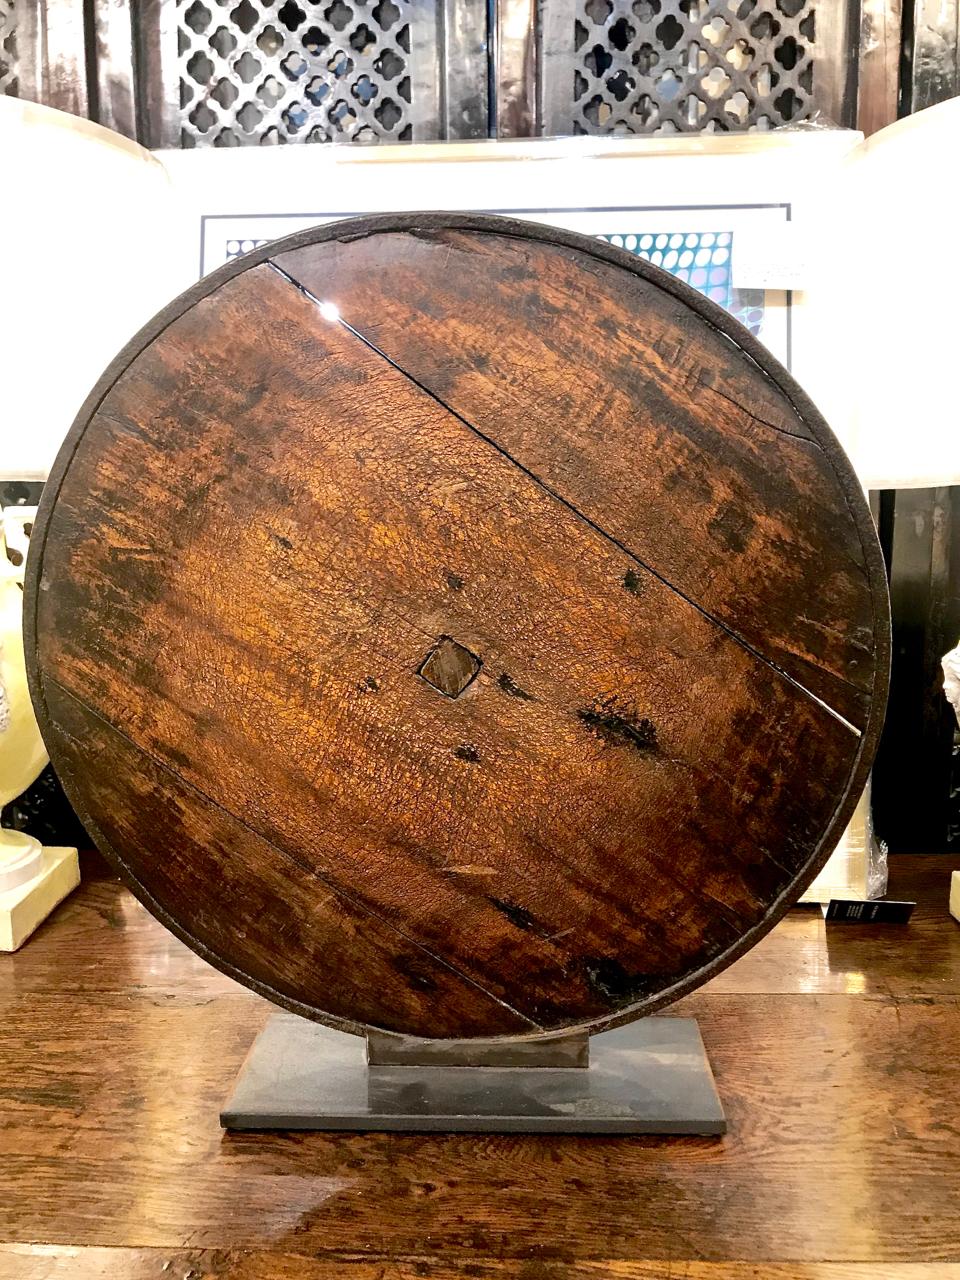 This is a beautifully patinated 18th or 19th century cart wheel. The wooden wheel retains is original hand forged iron rim and its forged iron reinforcements. The circular form symbolizes wholeness and oneness. The wheel is displayed on a custom